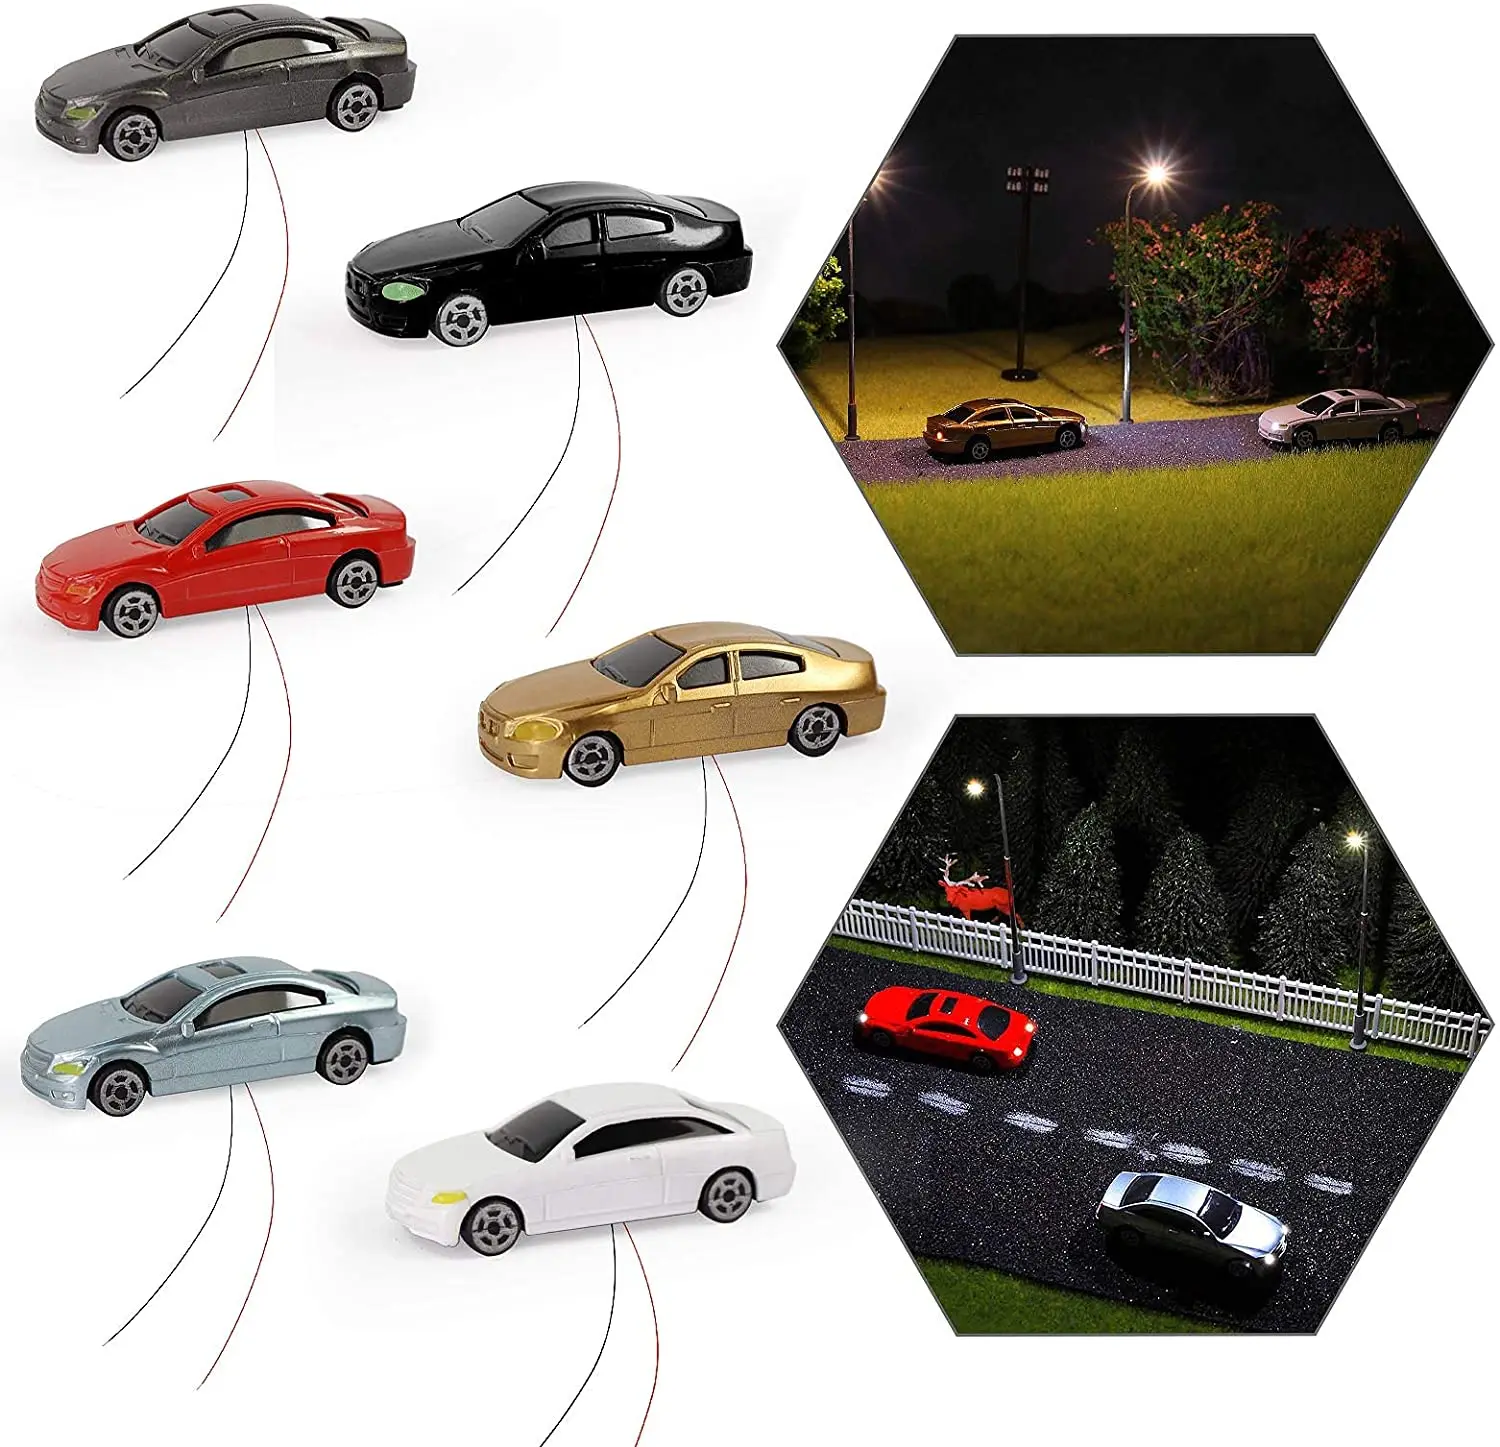 Model Multi Color Cars Miniature Building Materials Plastic Kid Toys 1:50 Scale DIY Dioramas For Architecture Train Layout  - buy with discount